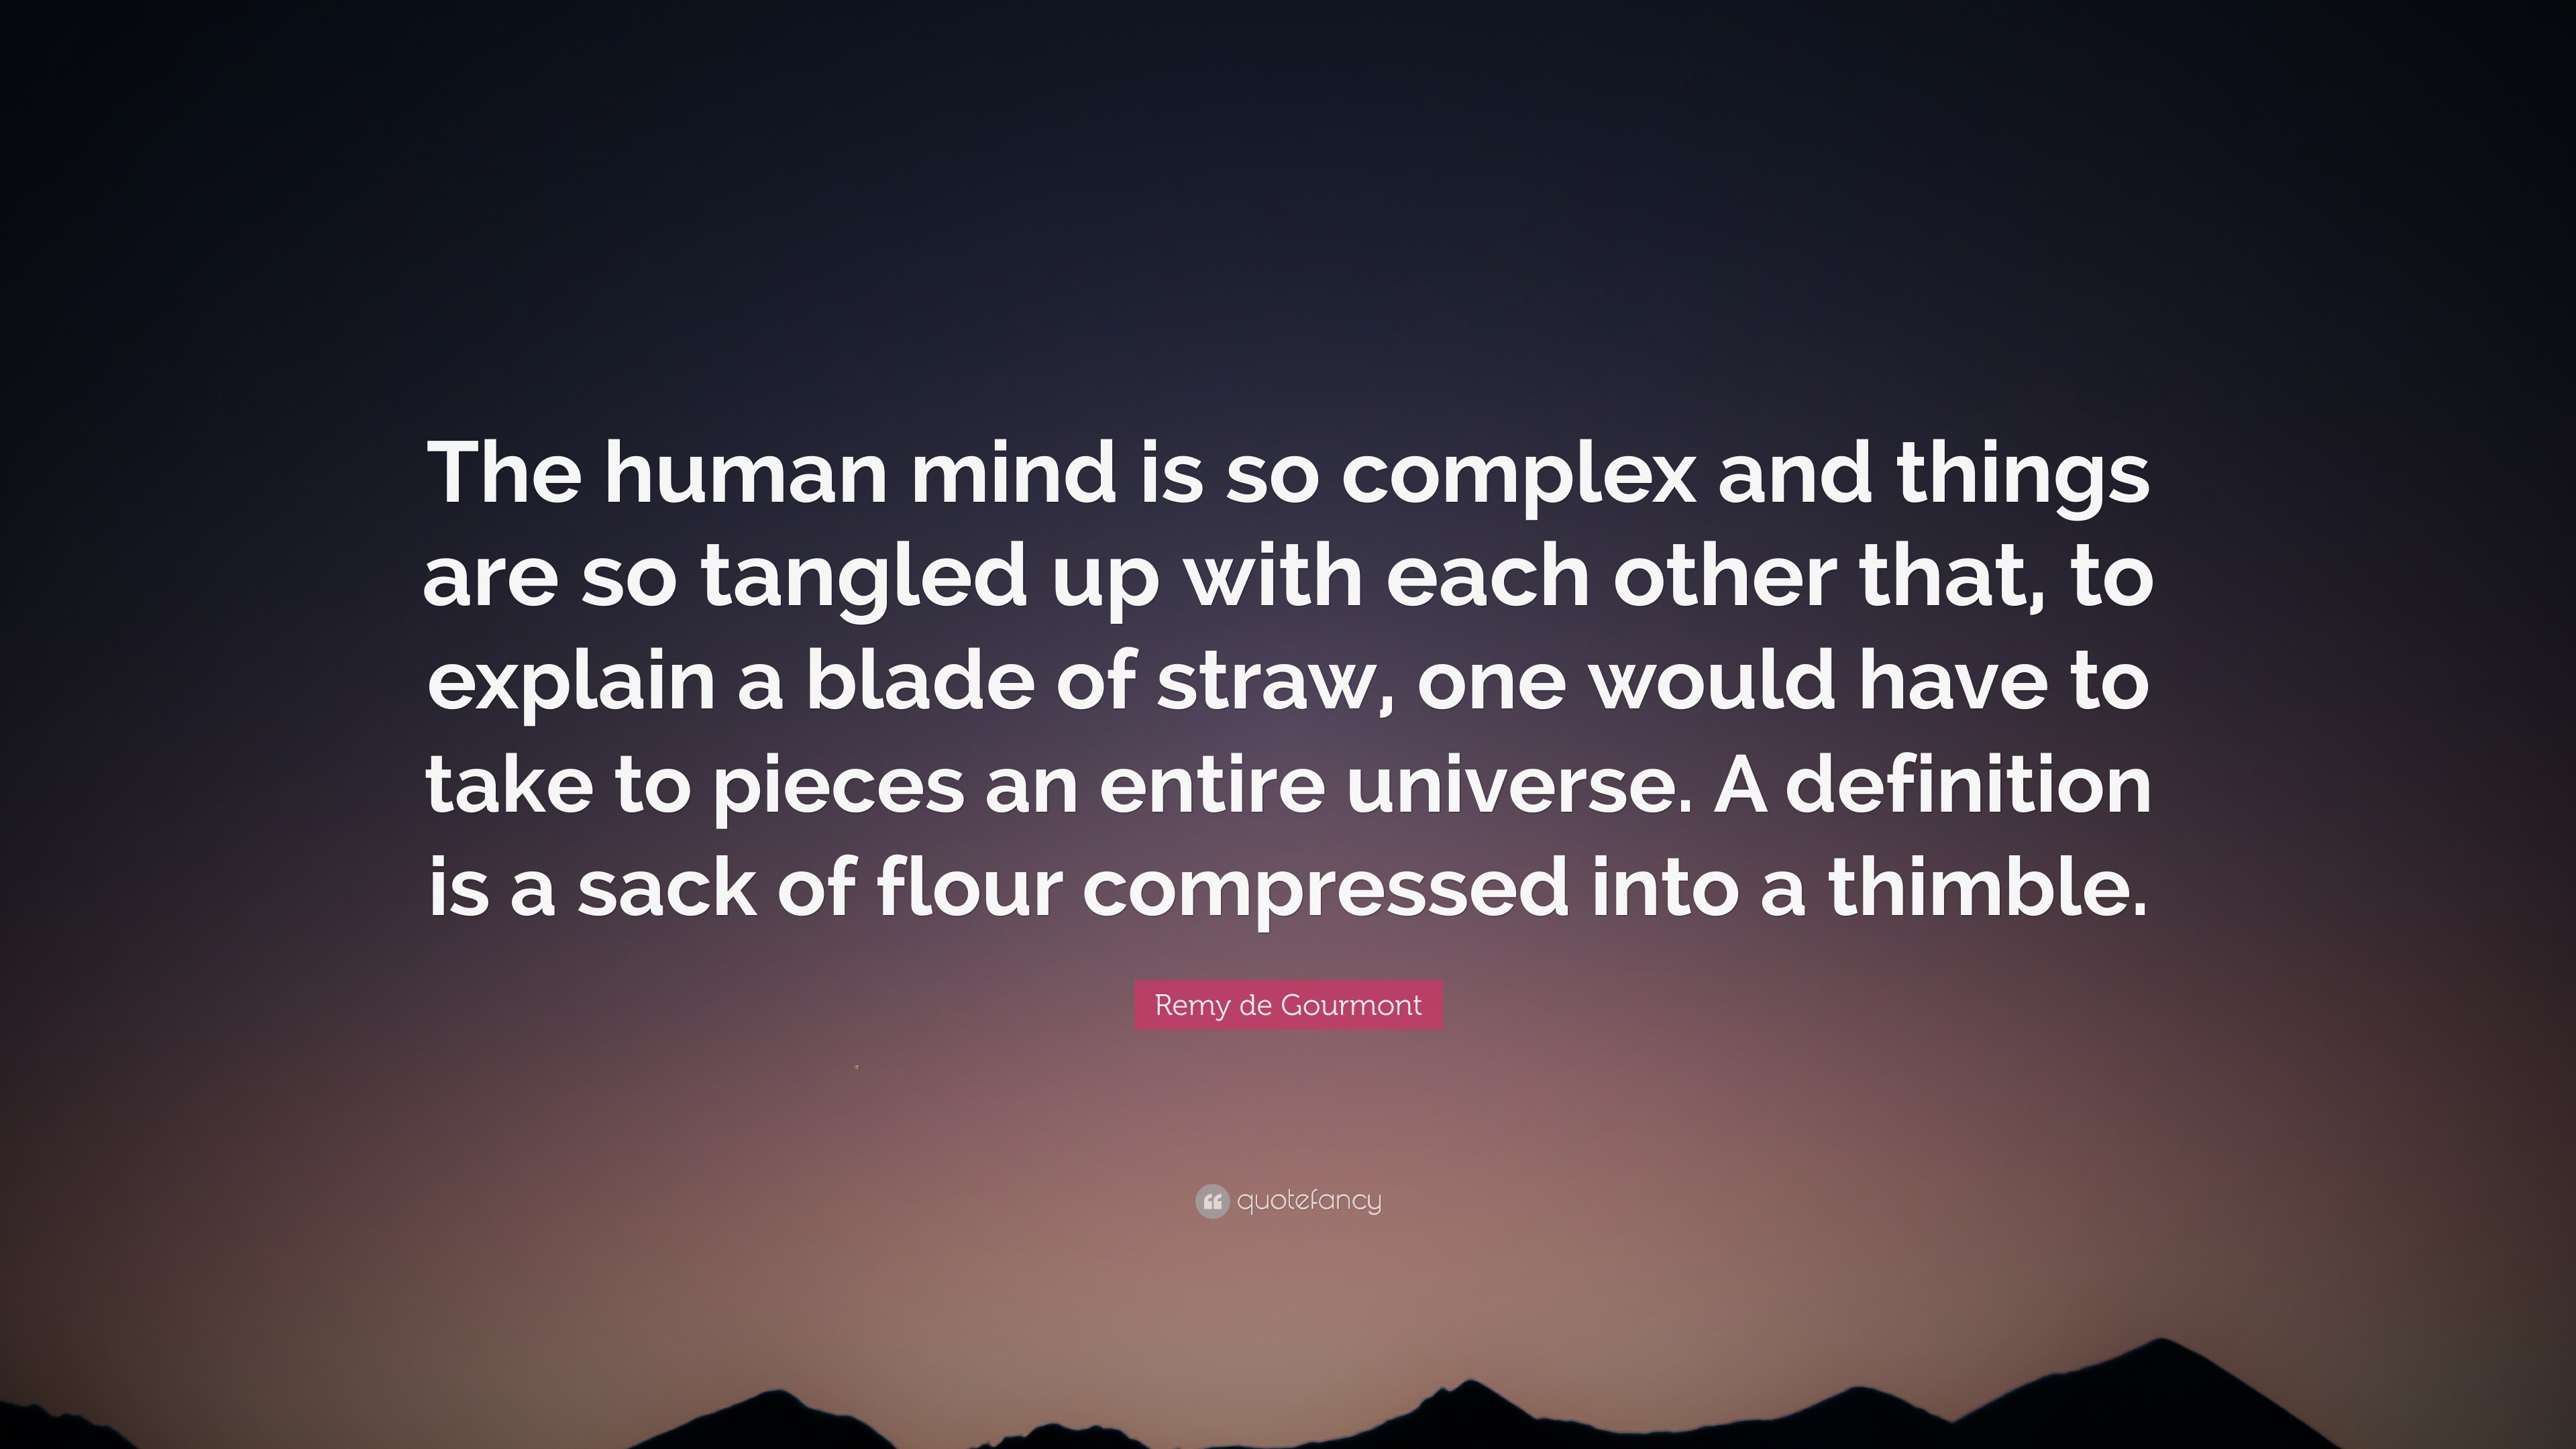 Remy De Gourmont Quote The Human Mind Is So Complex And Things Are So Tangled Up With Each Other That To Explain A Blade Of Straw One Would H Discover and share human mind quotes. remy de gourmont quote the human mind